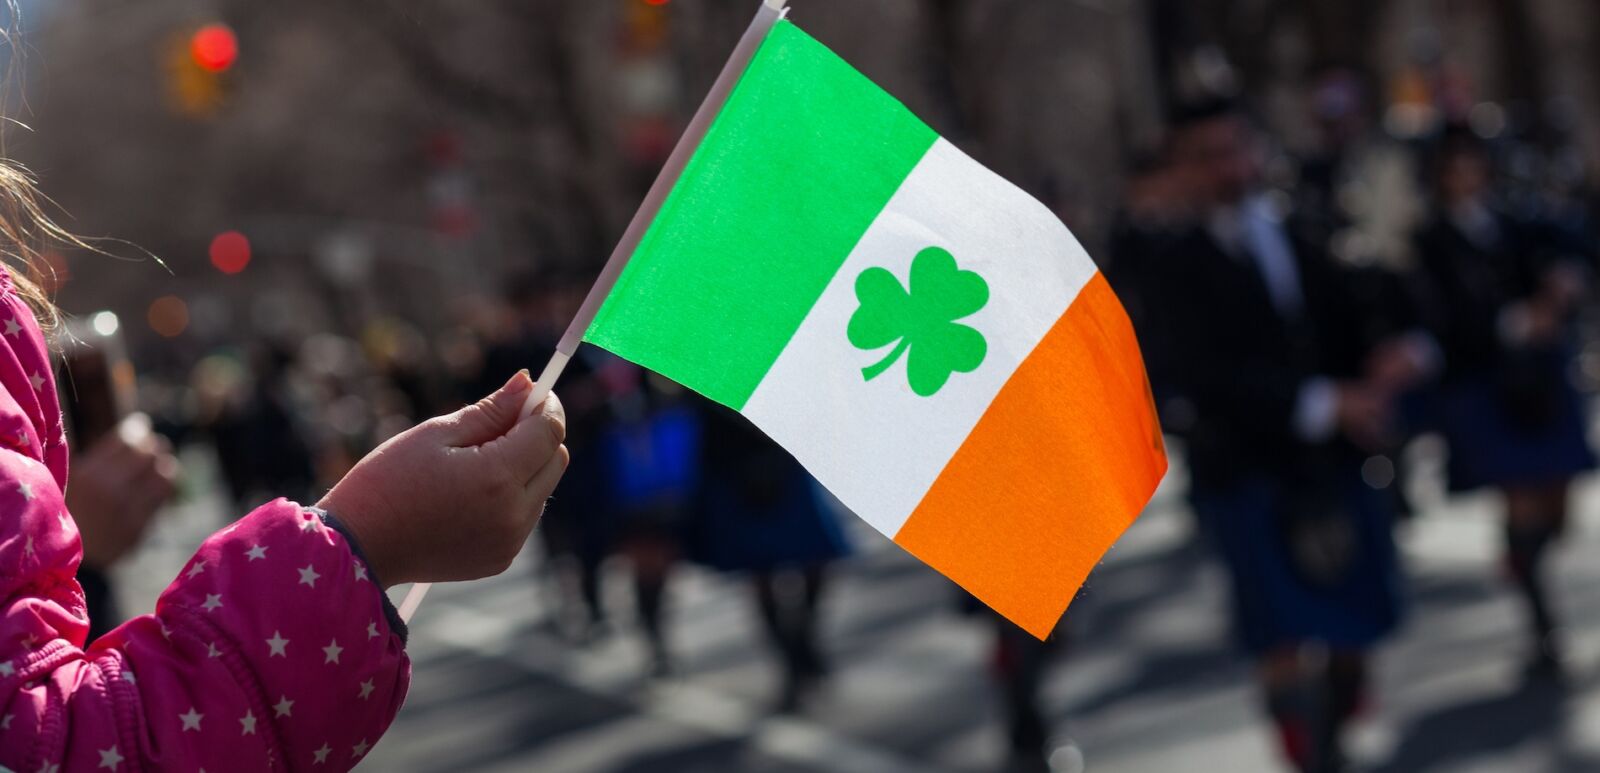 The Coolest St. Patrick’s Day Parades You Probably Haven’t Heard Of